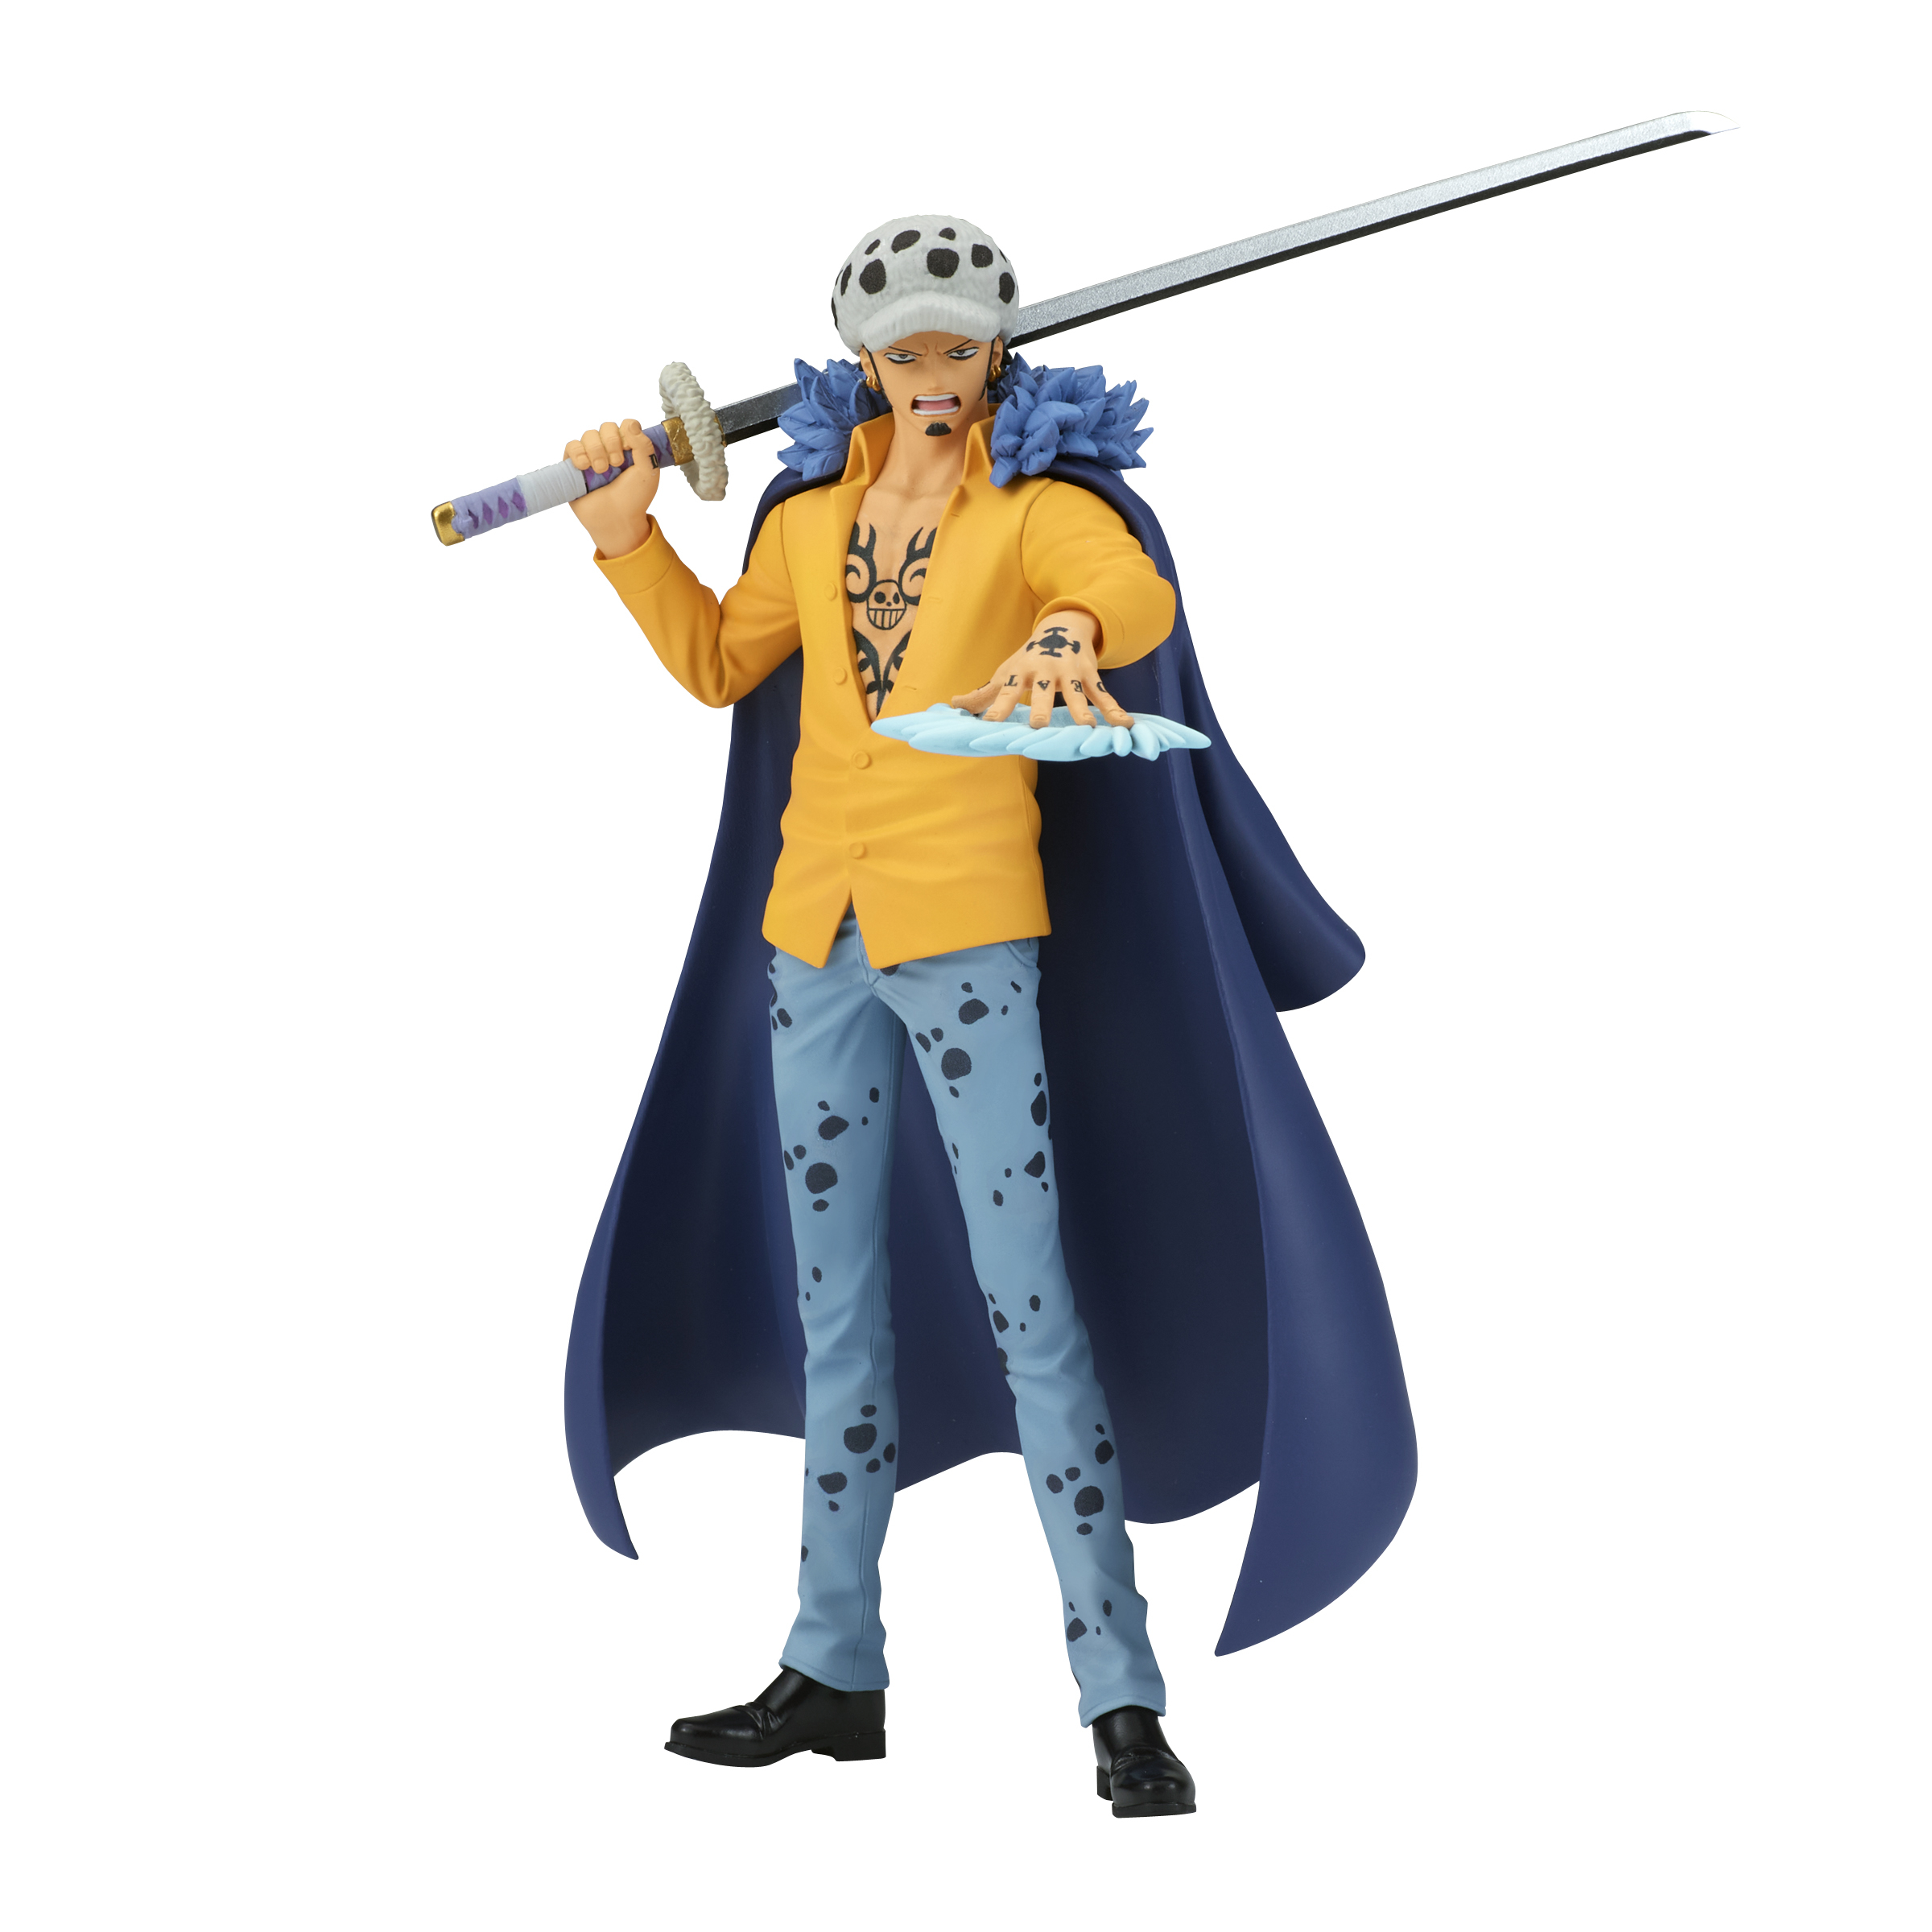 Is Law's goal not to directly obtain One Piece and become Pirate King? We  see law fight over these matters sometimes and sometimes he suggests that  his interests may be slightly different,